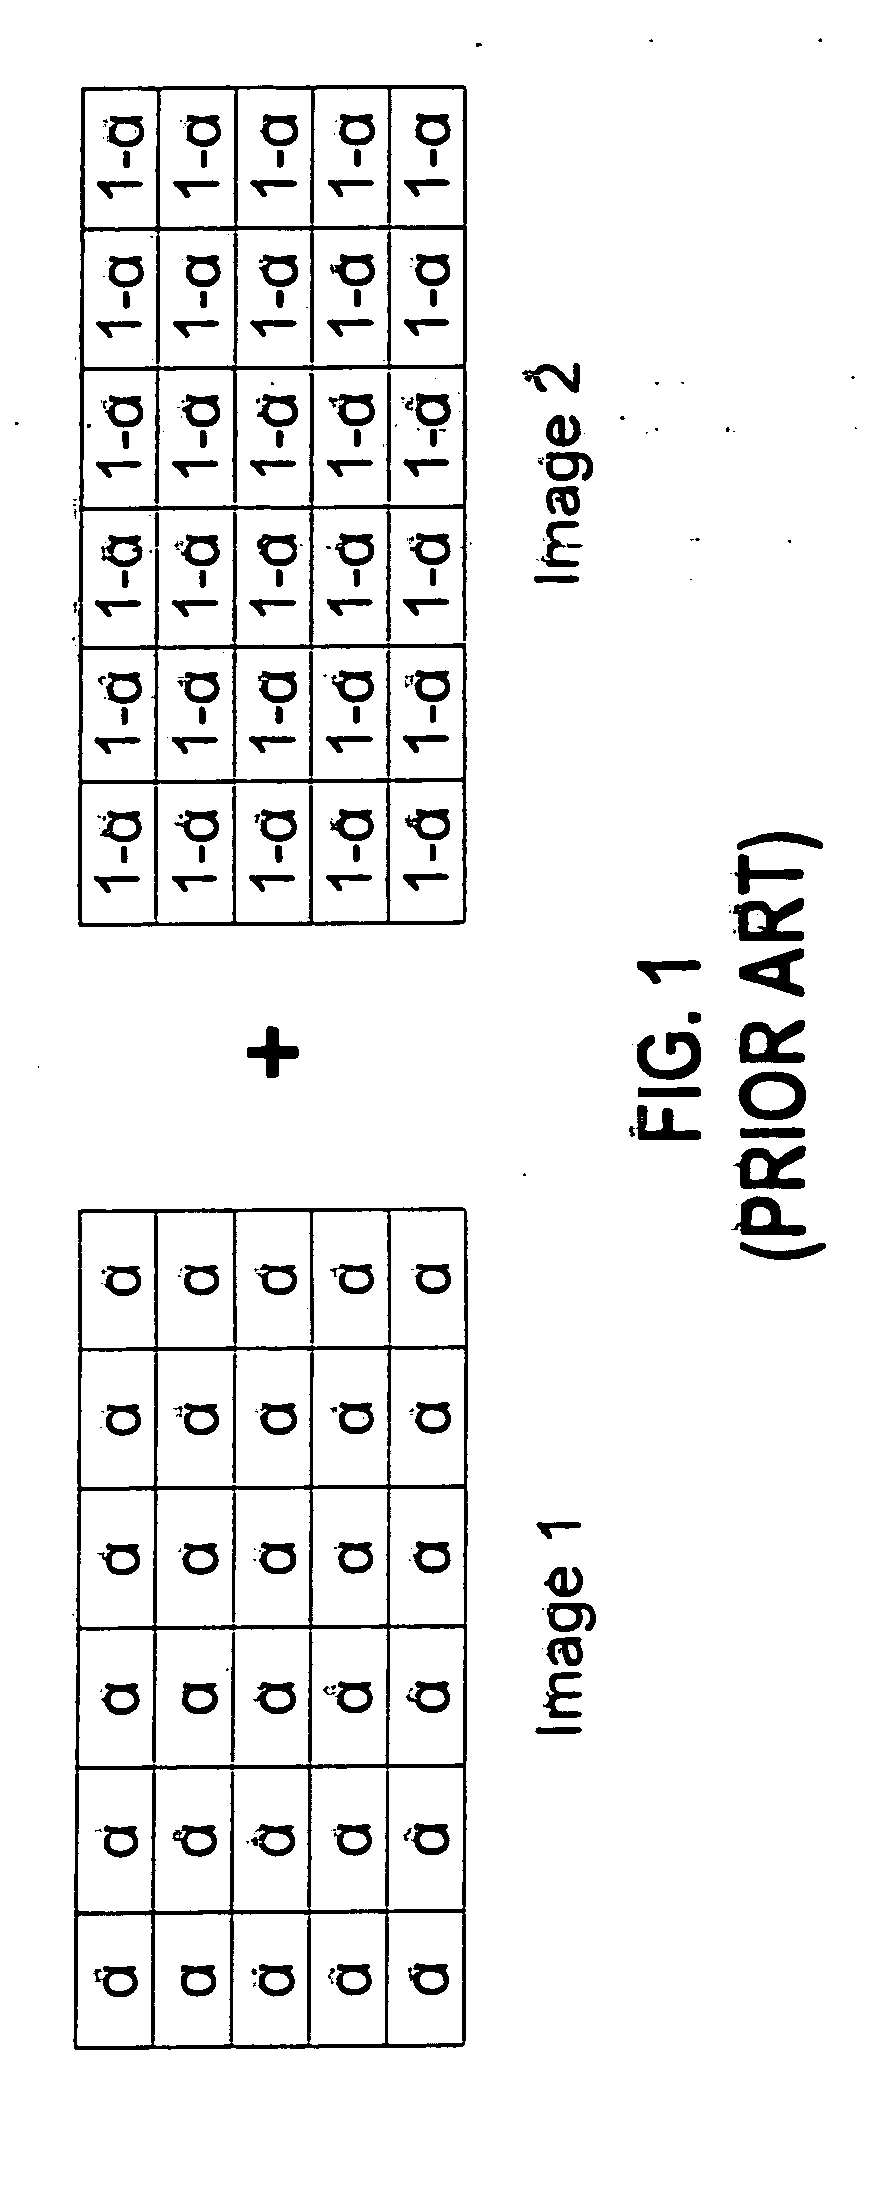 Method for combining two images based on eliminating background pixels from one of the images